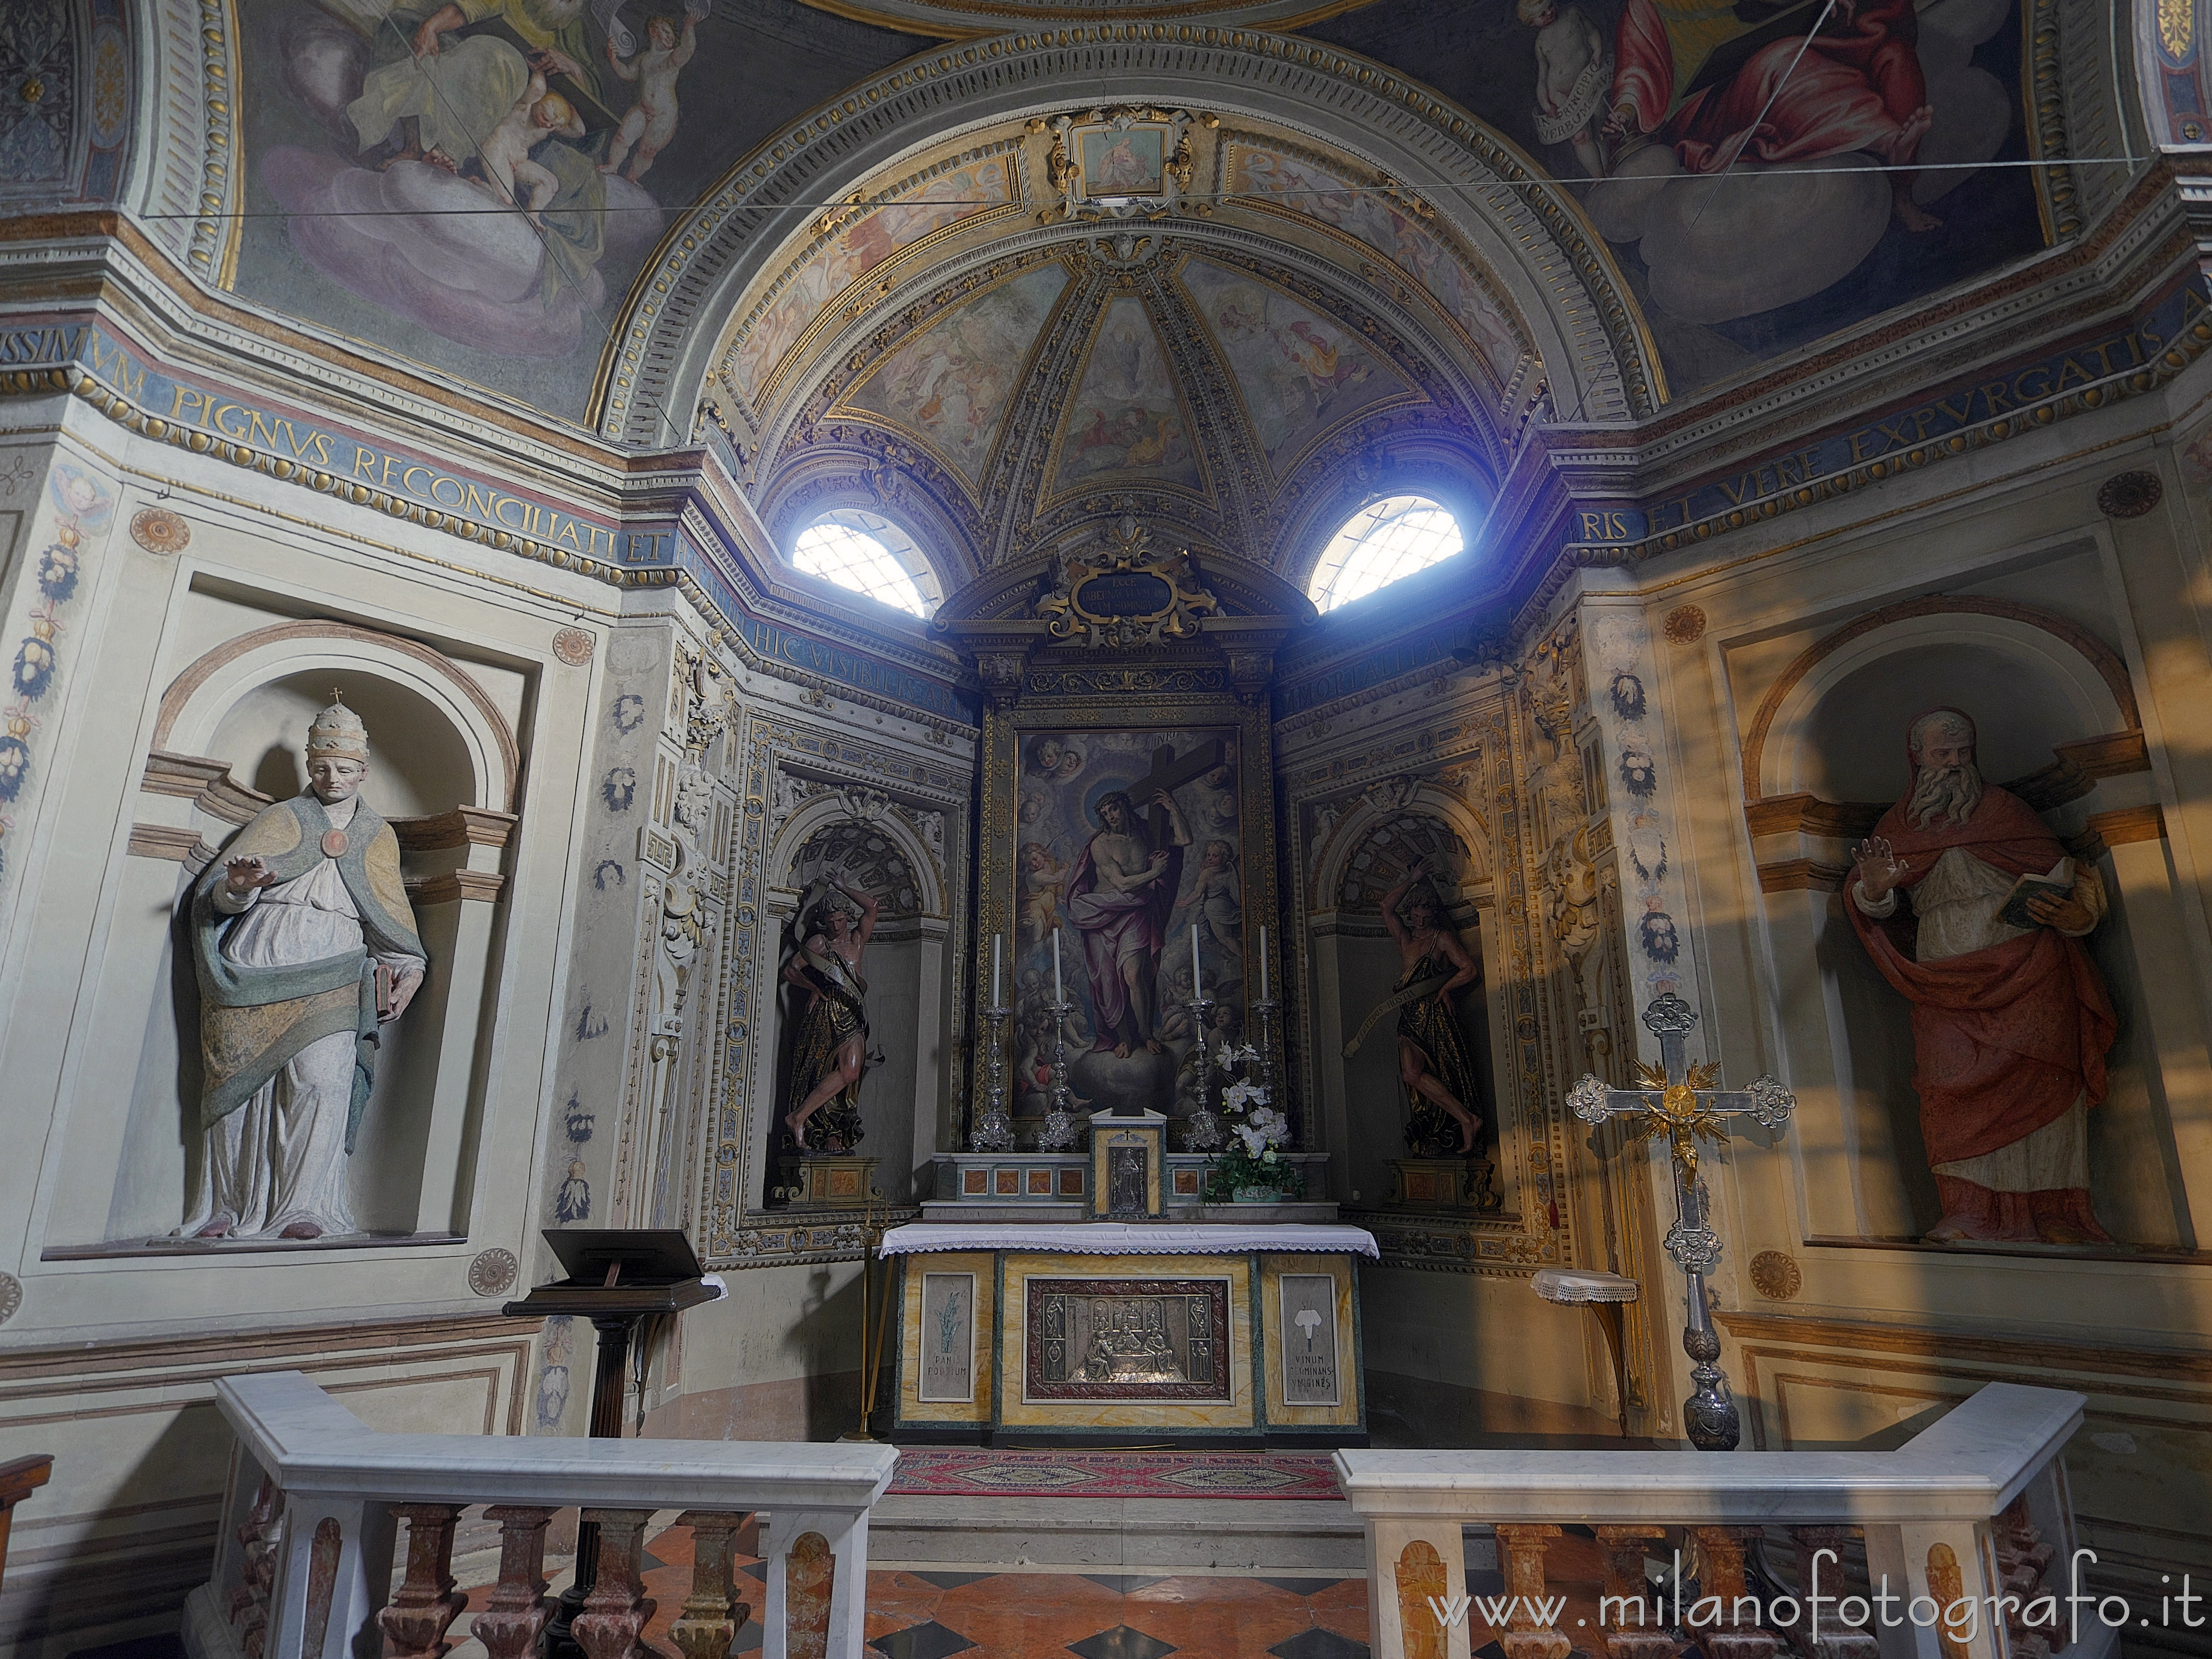 Caravaggio (Bergamo, Italy): Presbytery of the Chapel of the Blessed Sacrament in the Church of the Saints Fermo and Rustico - Caravaggio (Bergamo, Italy)